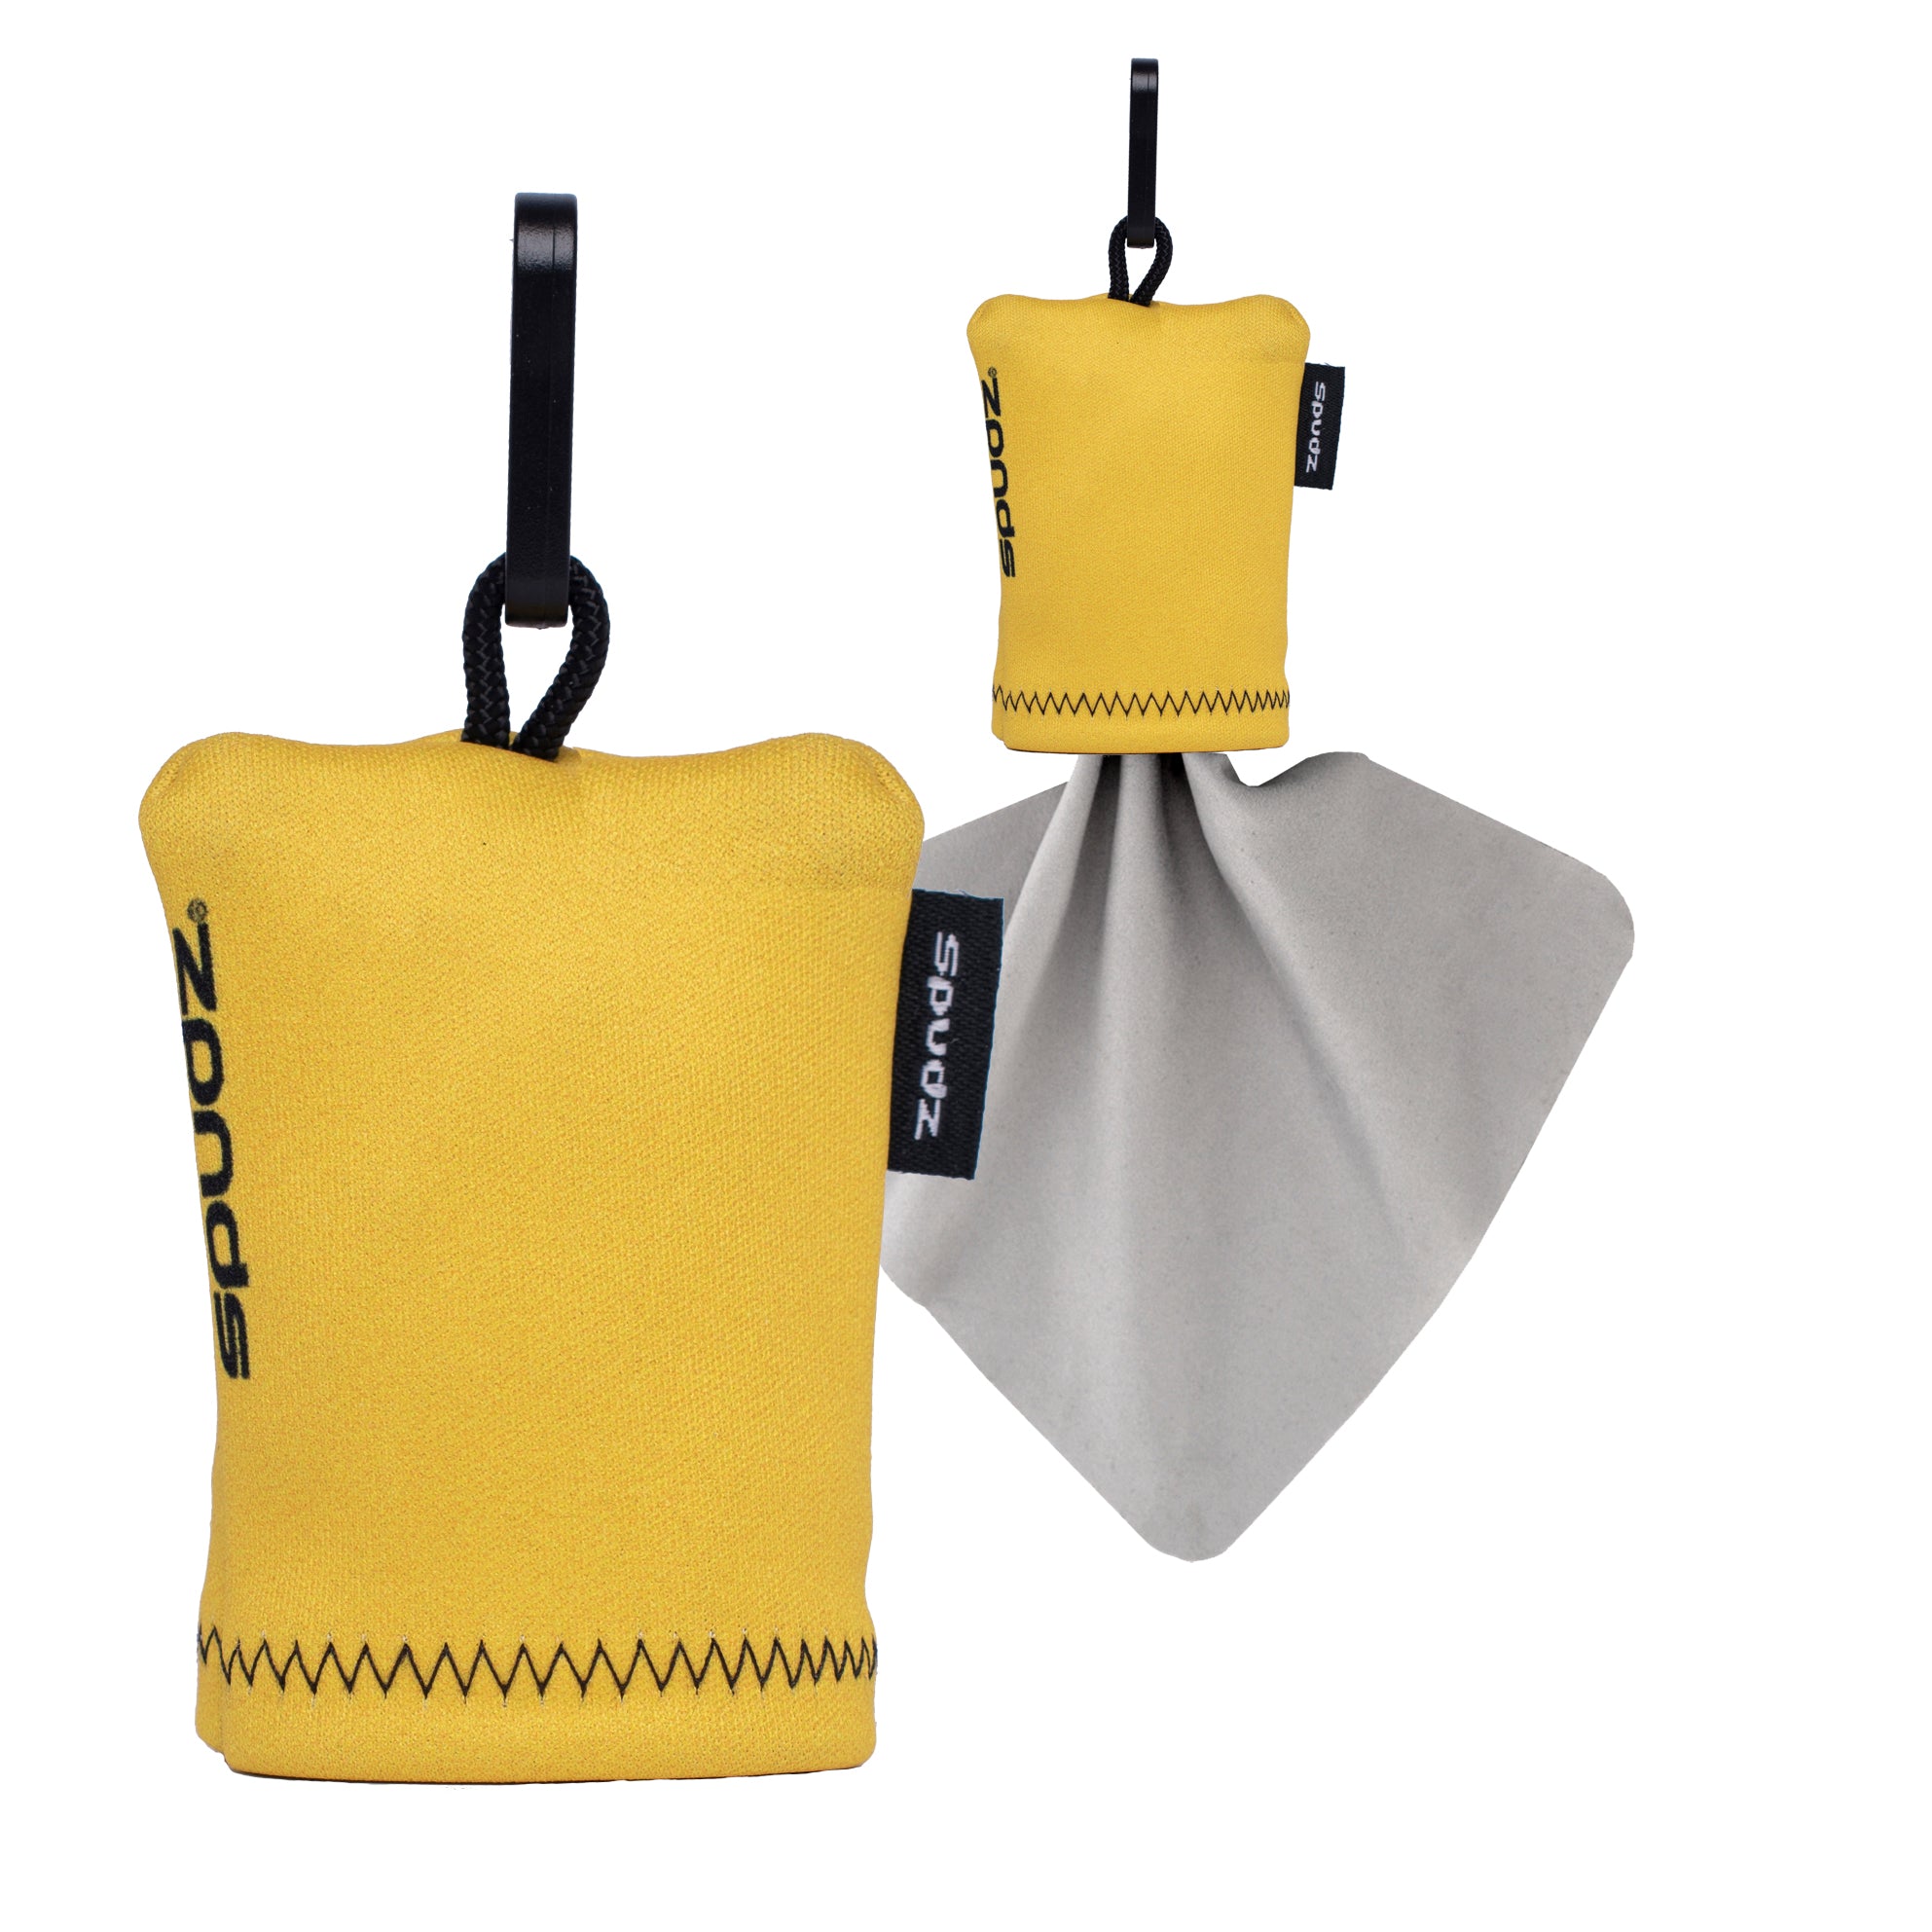 6 x 6 Classic Lens Cloth In Pouch (Yellow)